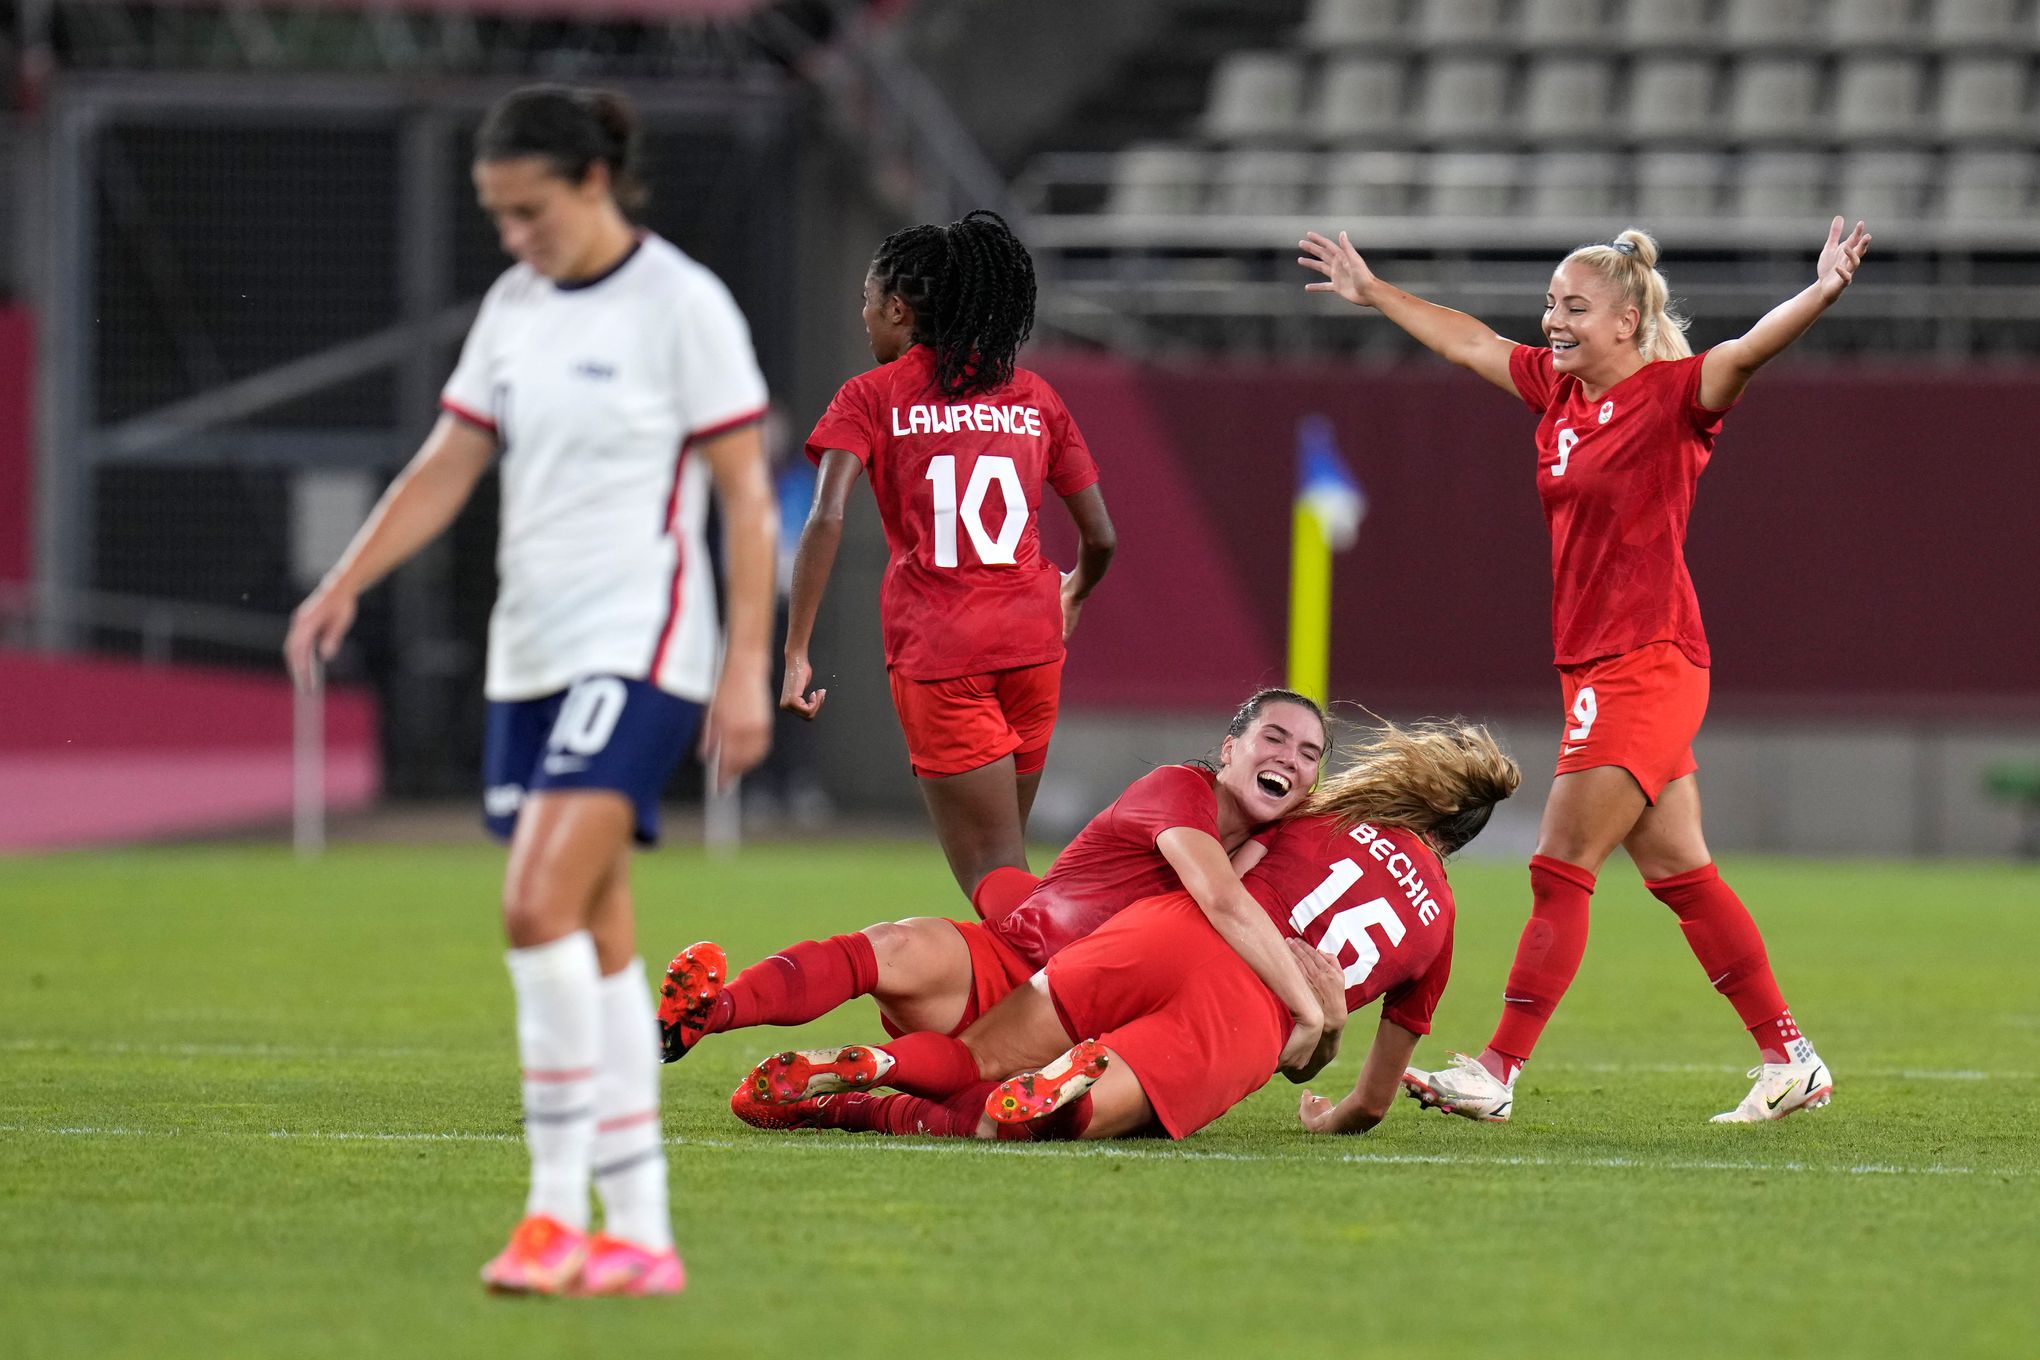 Canada upsets US with 1-0 win in women’s soccer - The Seattle Times